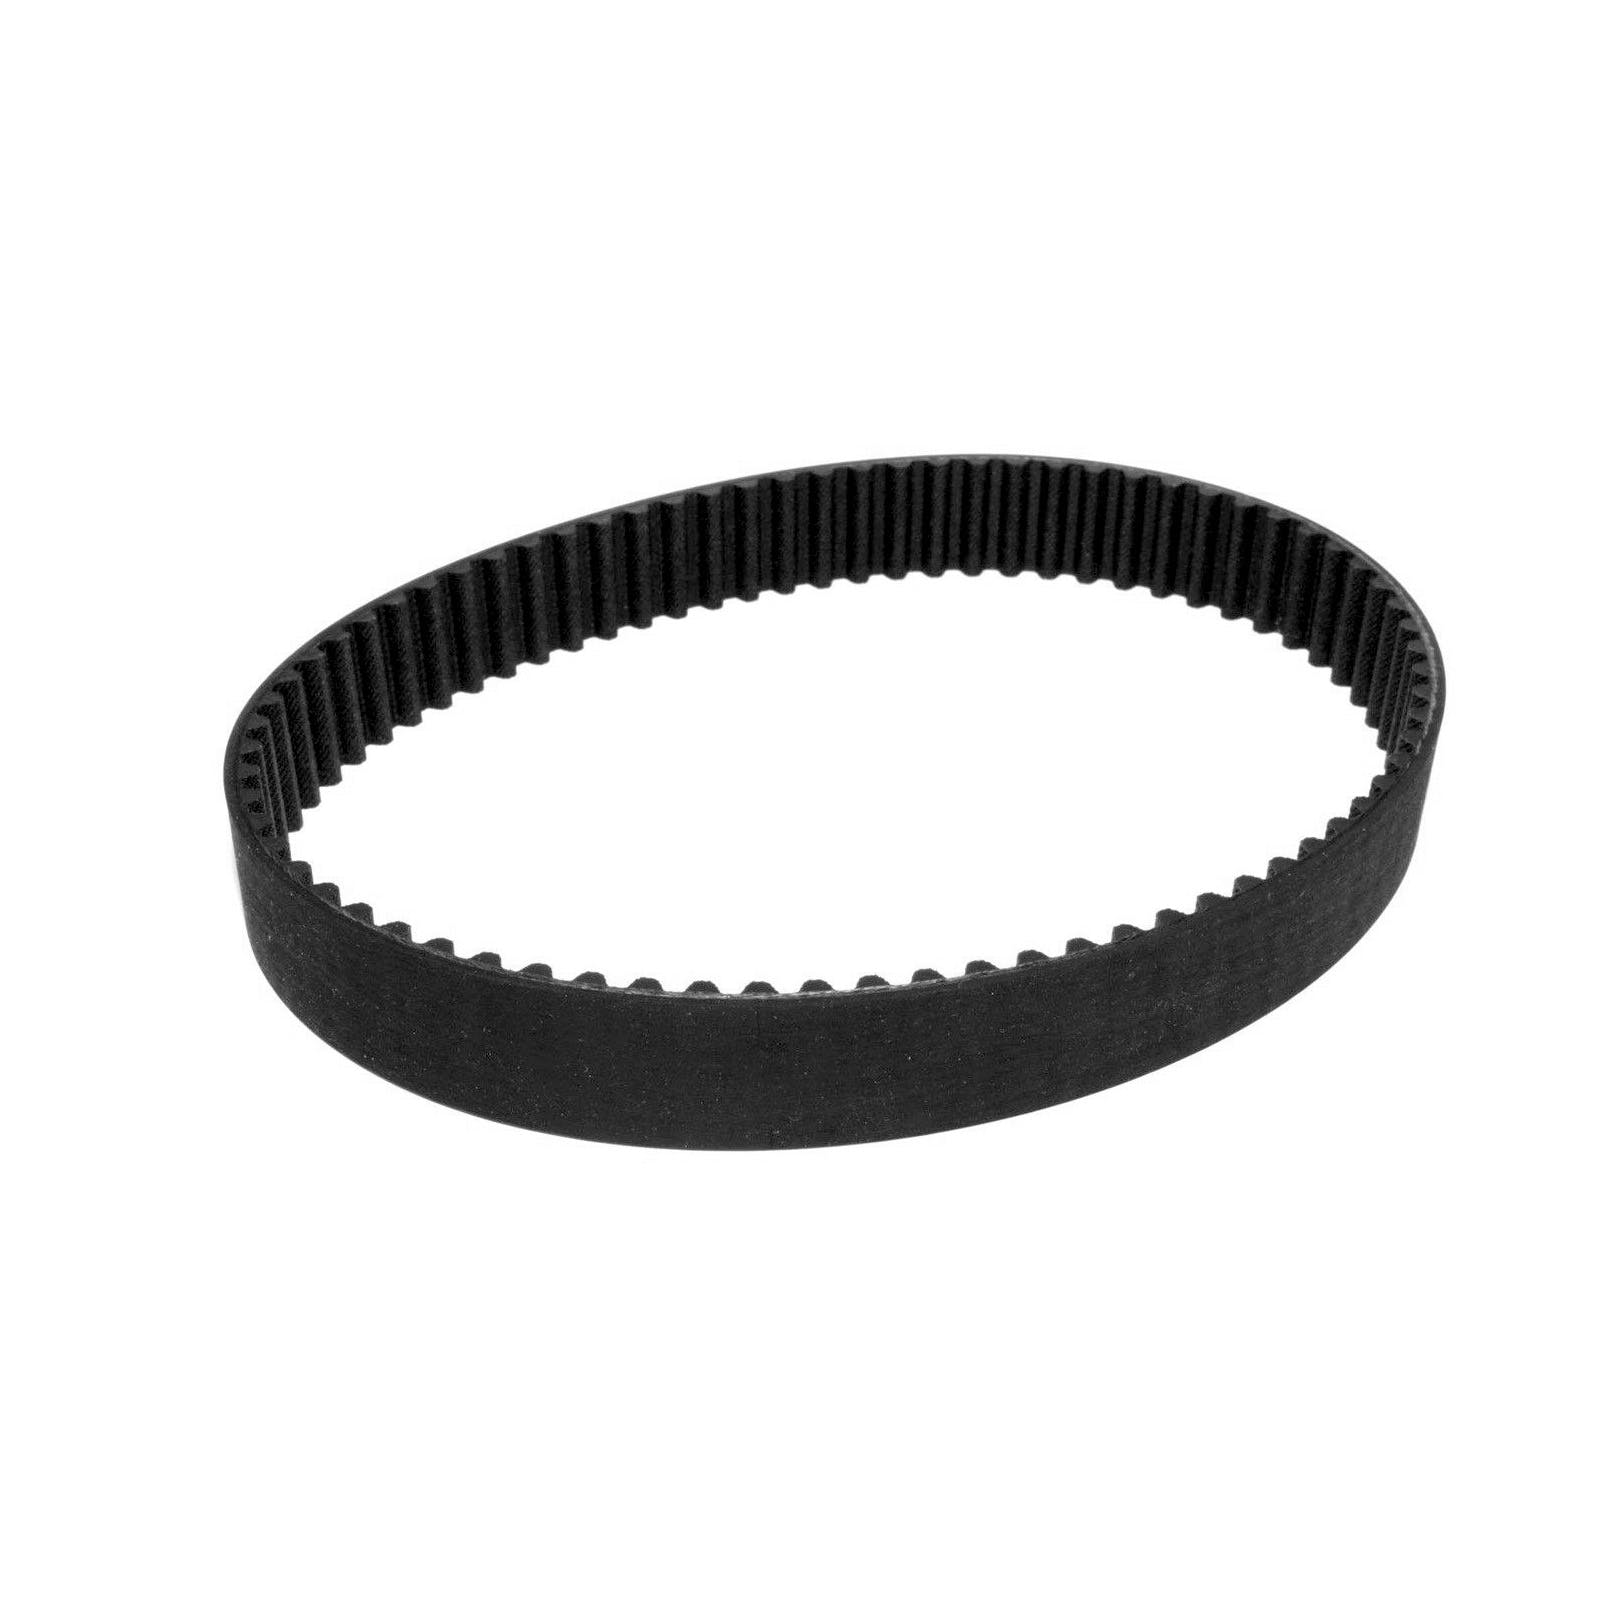 Speedmaster PCE629.1002 79-Tooth 29.5 mm X 635mm Timing Belt Drive Replacement Belt